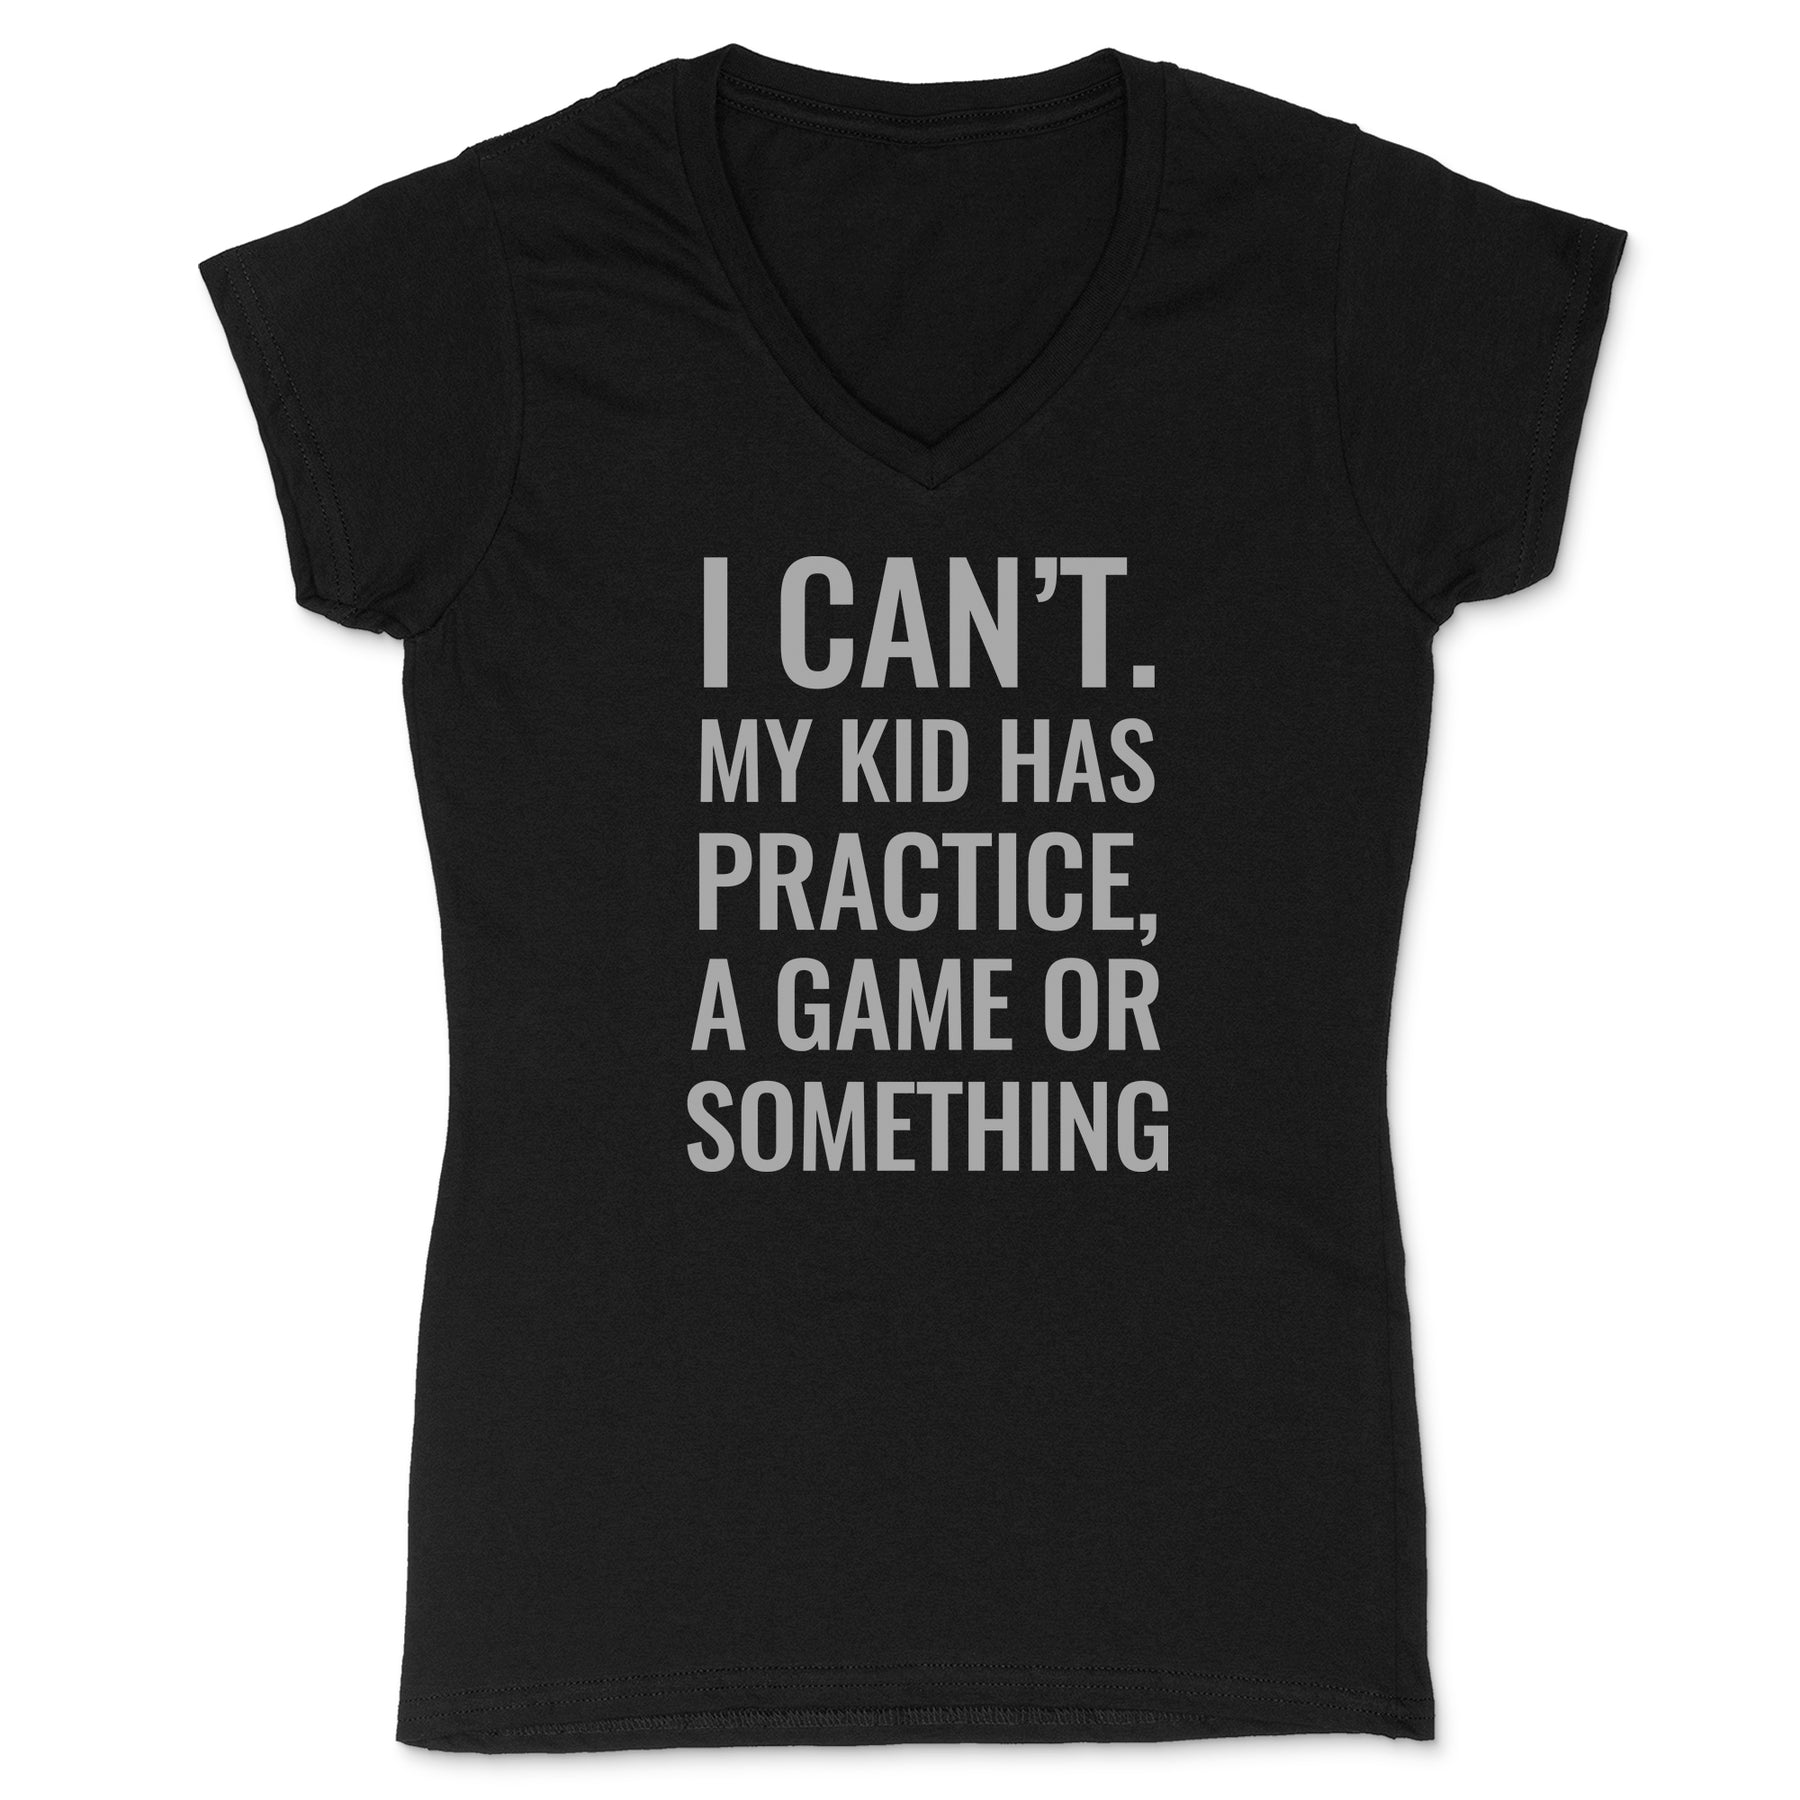 "I Can't" Premium Midweight Ringspun Cotton T-Shirt - Womens Fits